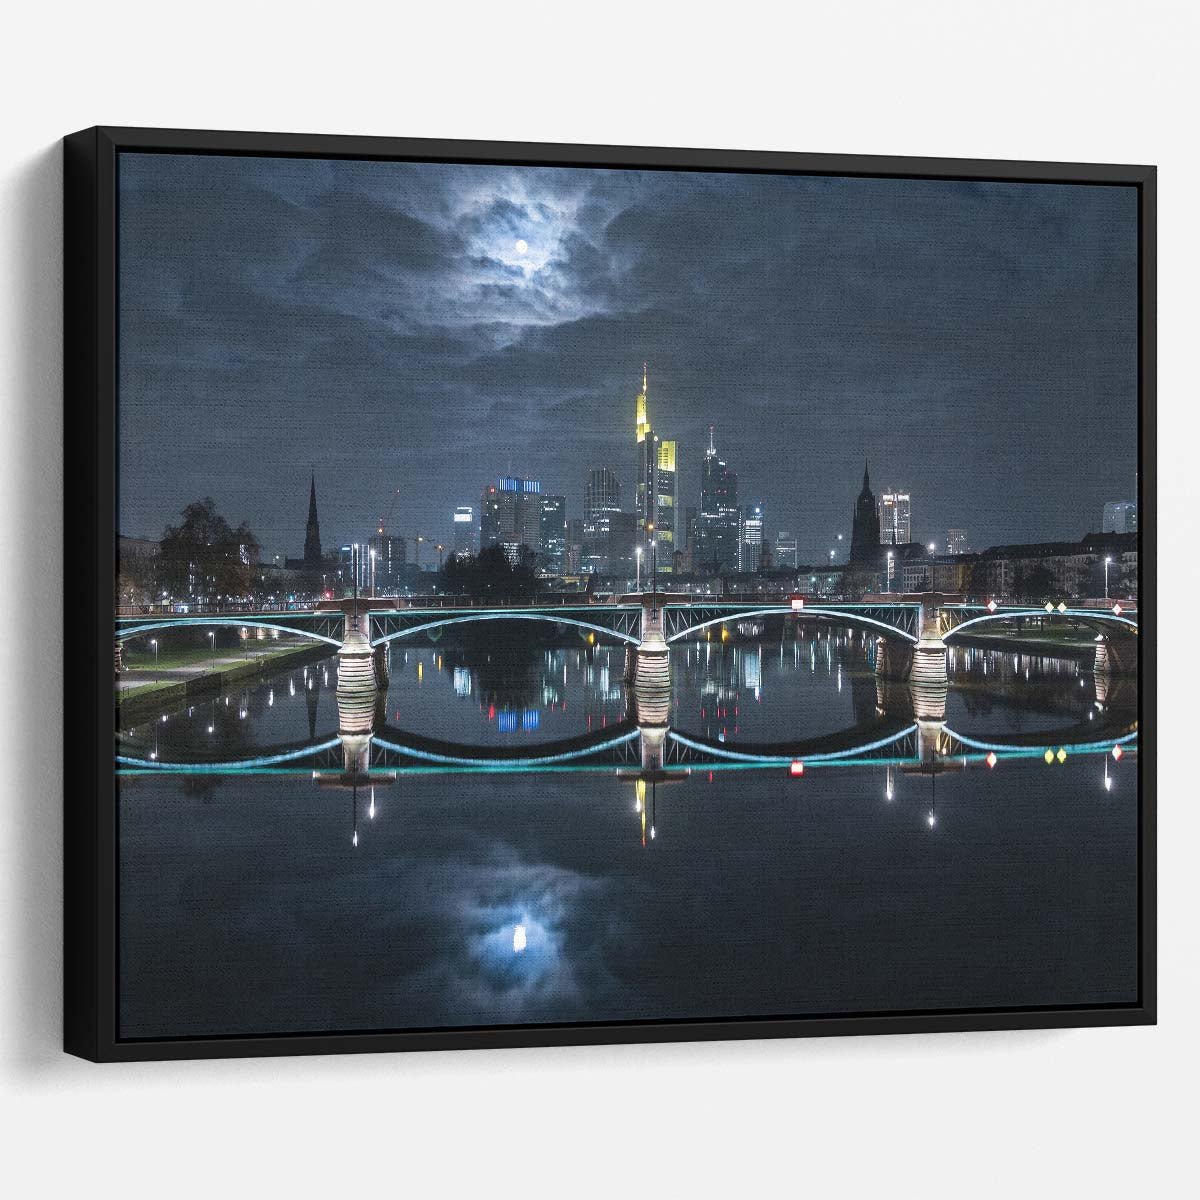 Frankfurt Skyline & Moonlit Reflections Wall Art by Luxuriance Designs. Made in USA.